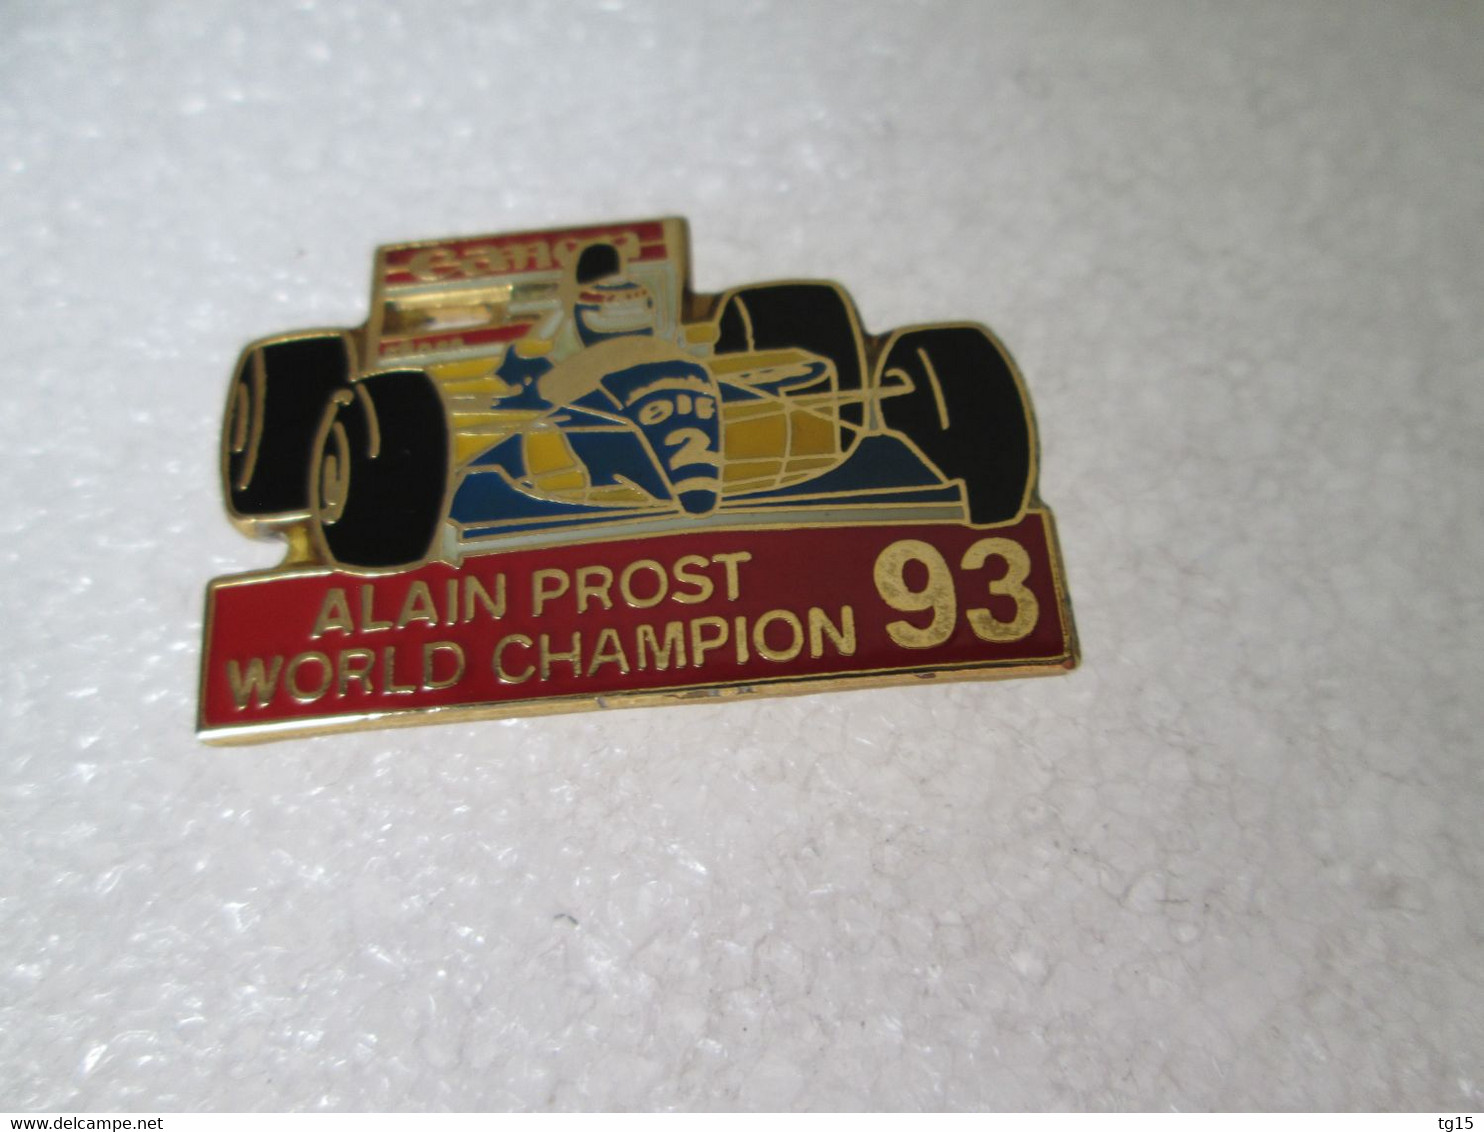 RARE TOP PIN'S   ALAIN PROST WORLD CHAMPION 1993  FORMULE 1  WILLIAMS RENAULT  email grand feu